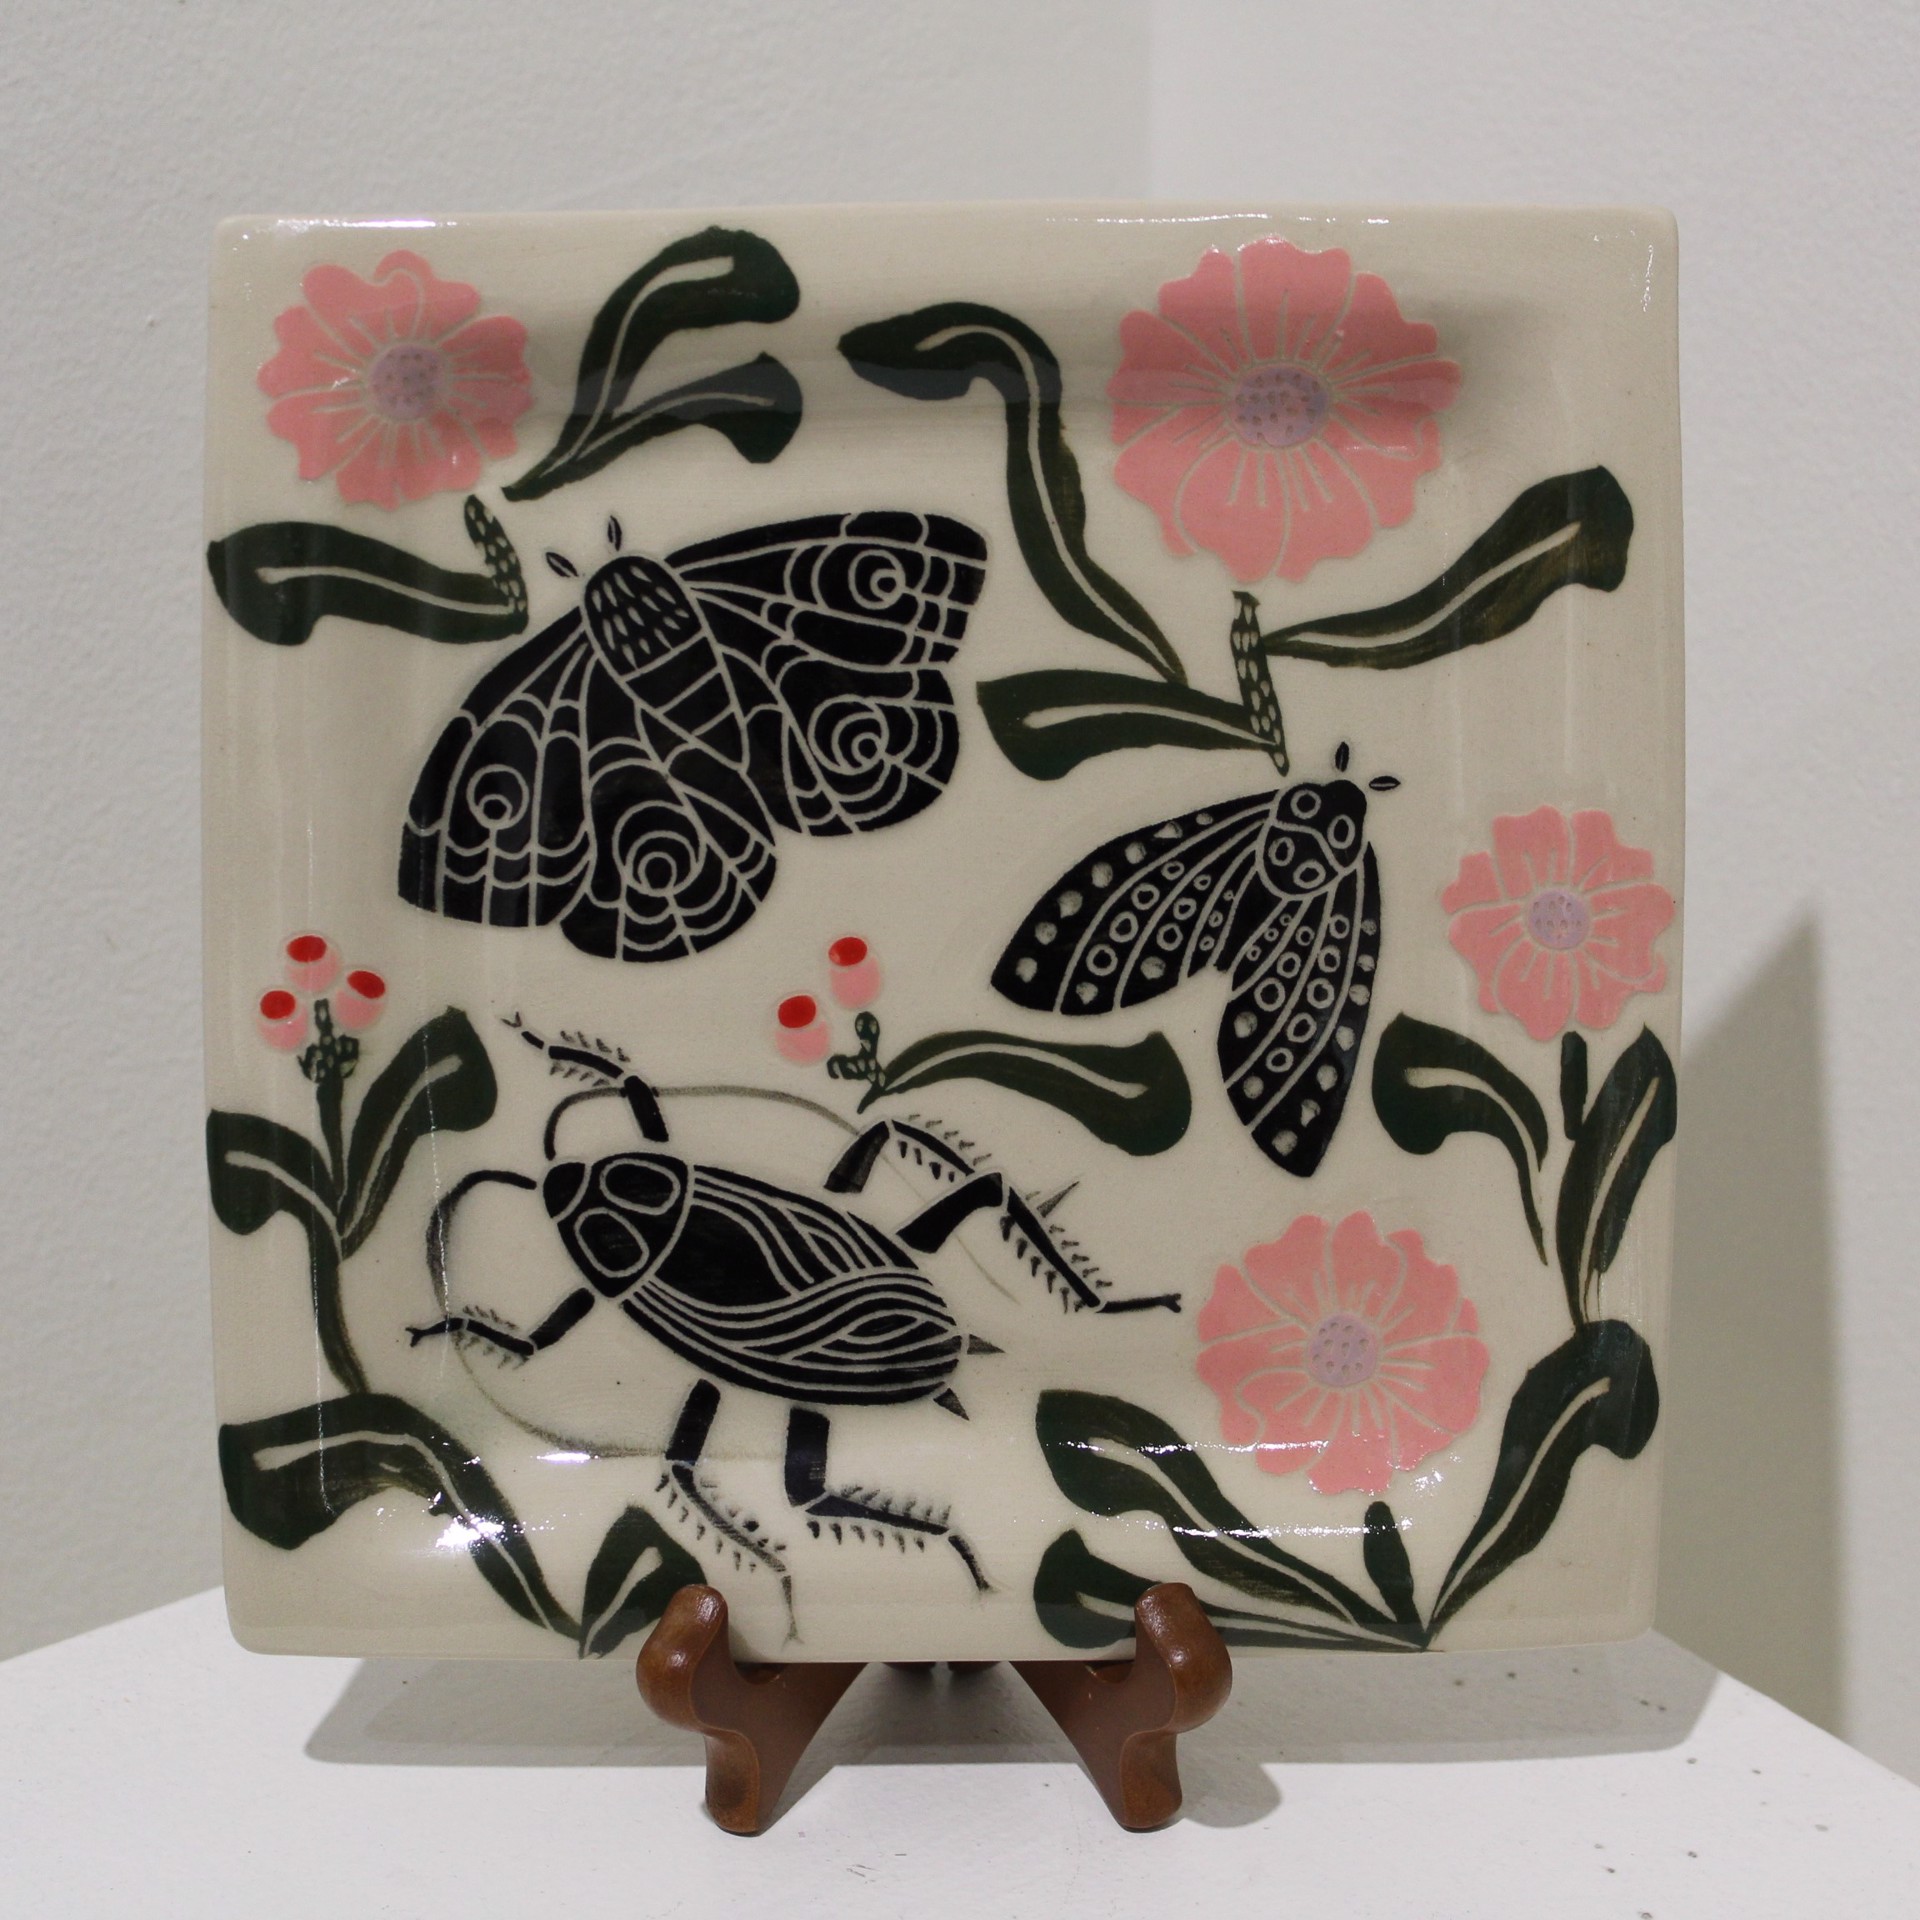 Bug Plate 4 by Abbey Kuhe